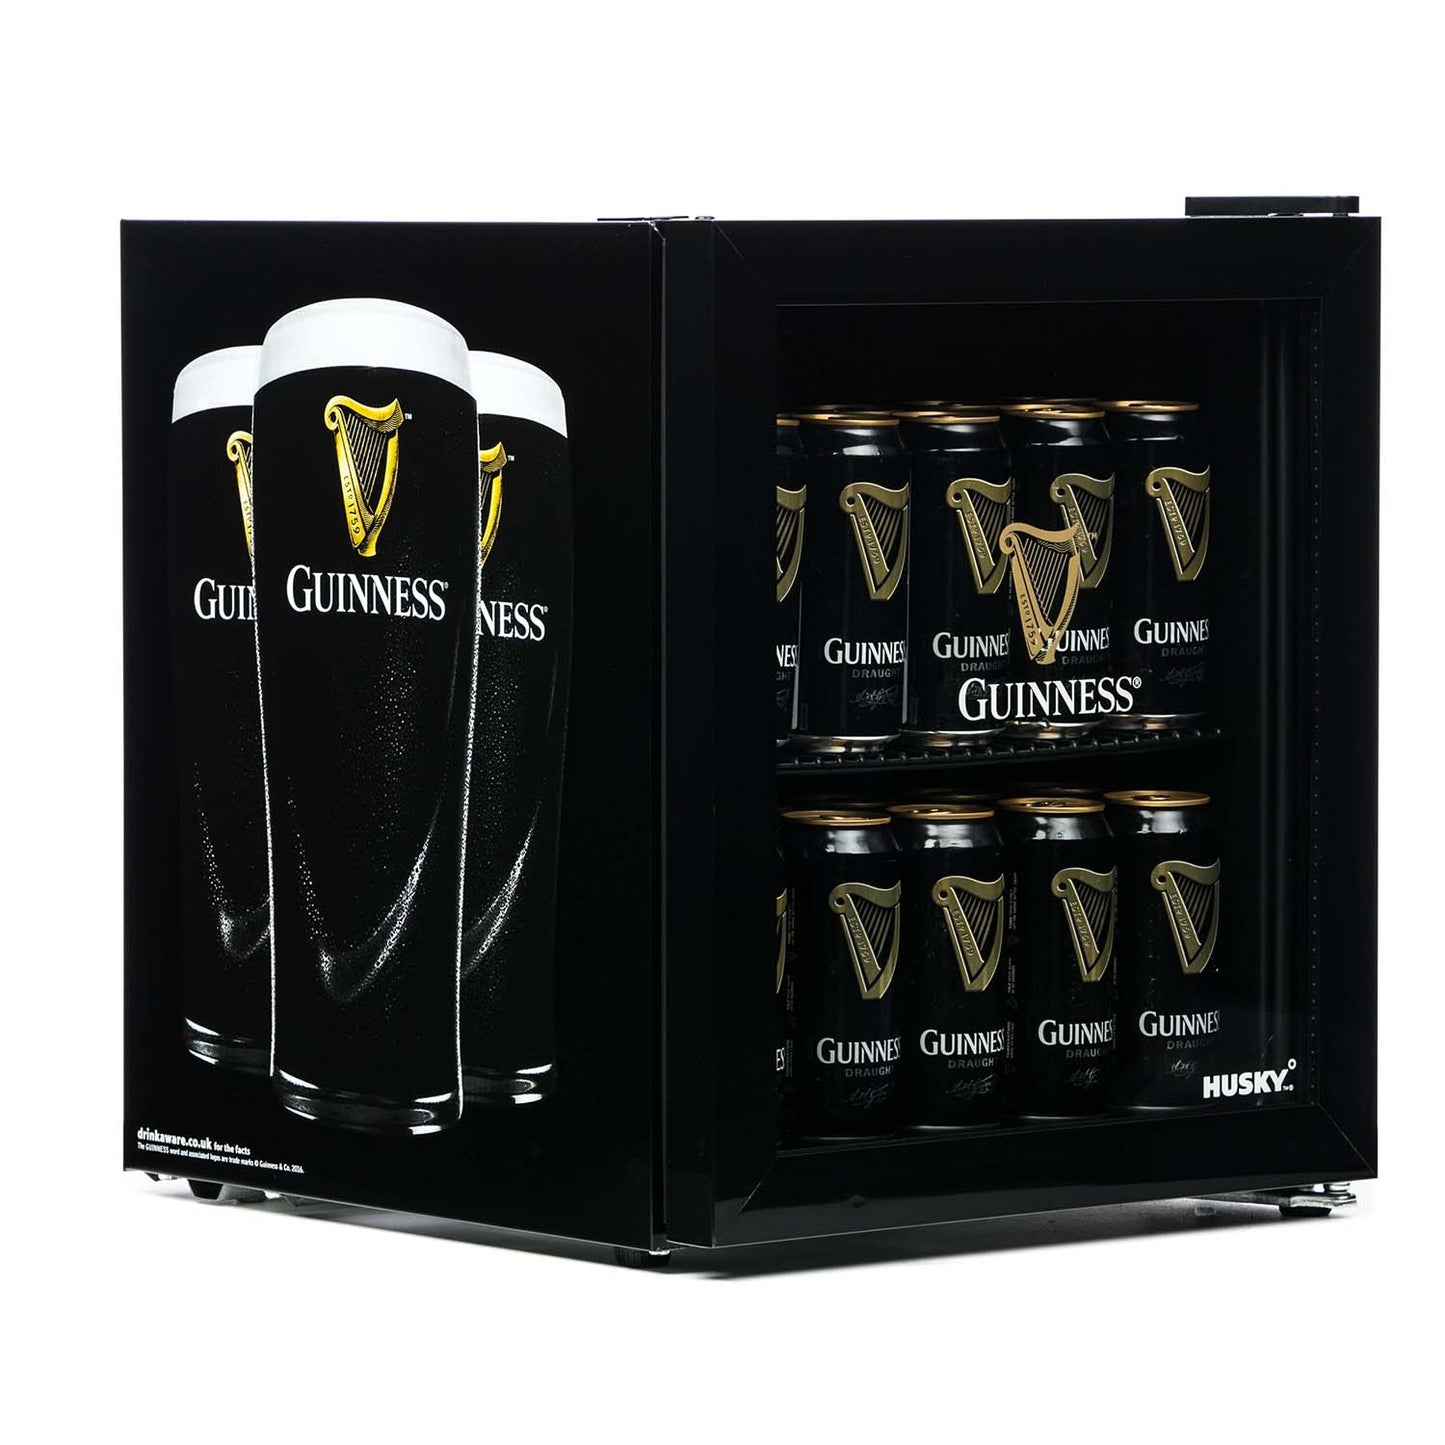 Sentence with replaced product: Guinness stout mini fridge with cans of beer.